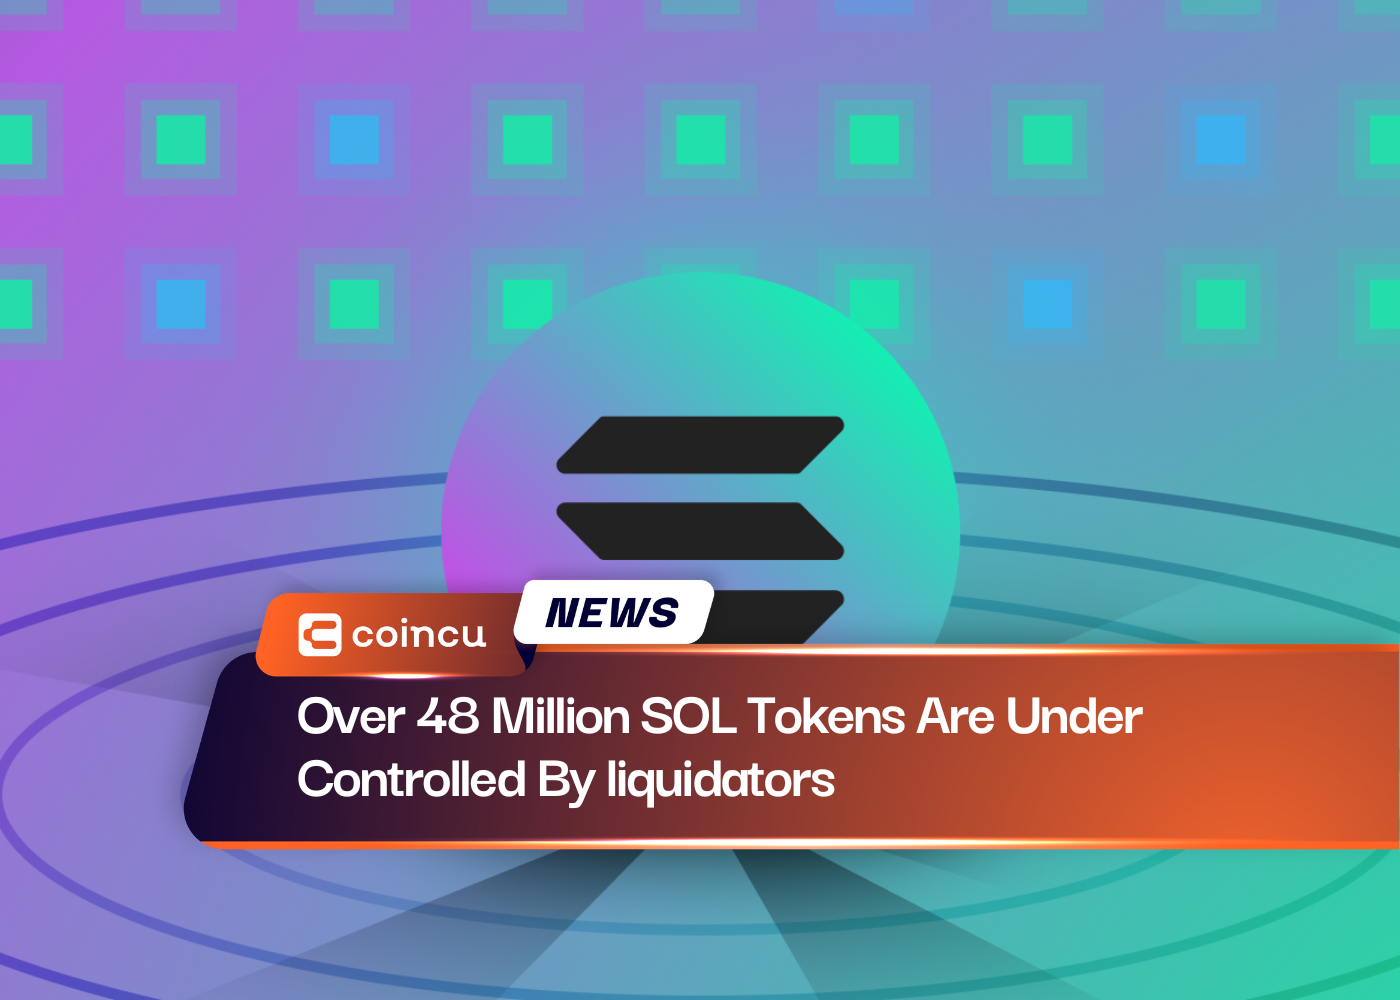 Over 48 Million SOL Tokens Are Under Controlled By liquidators